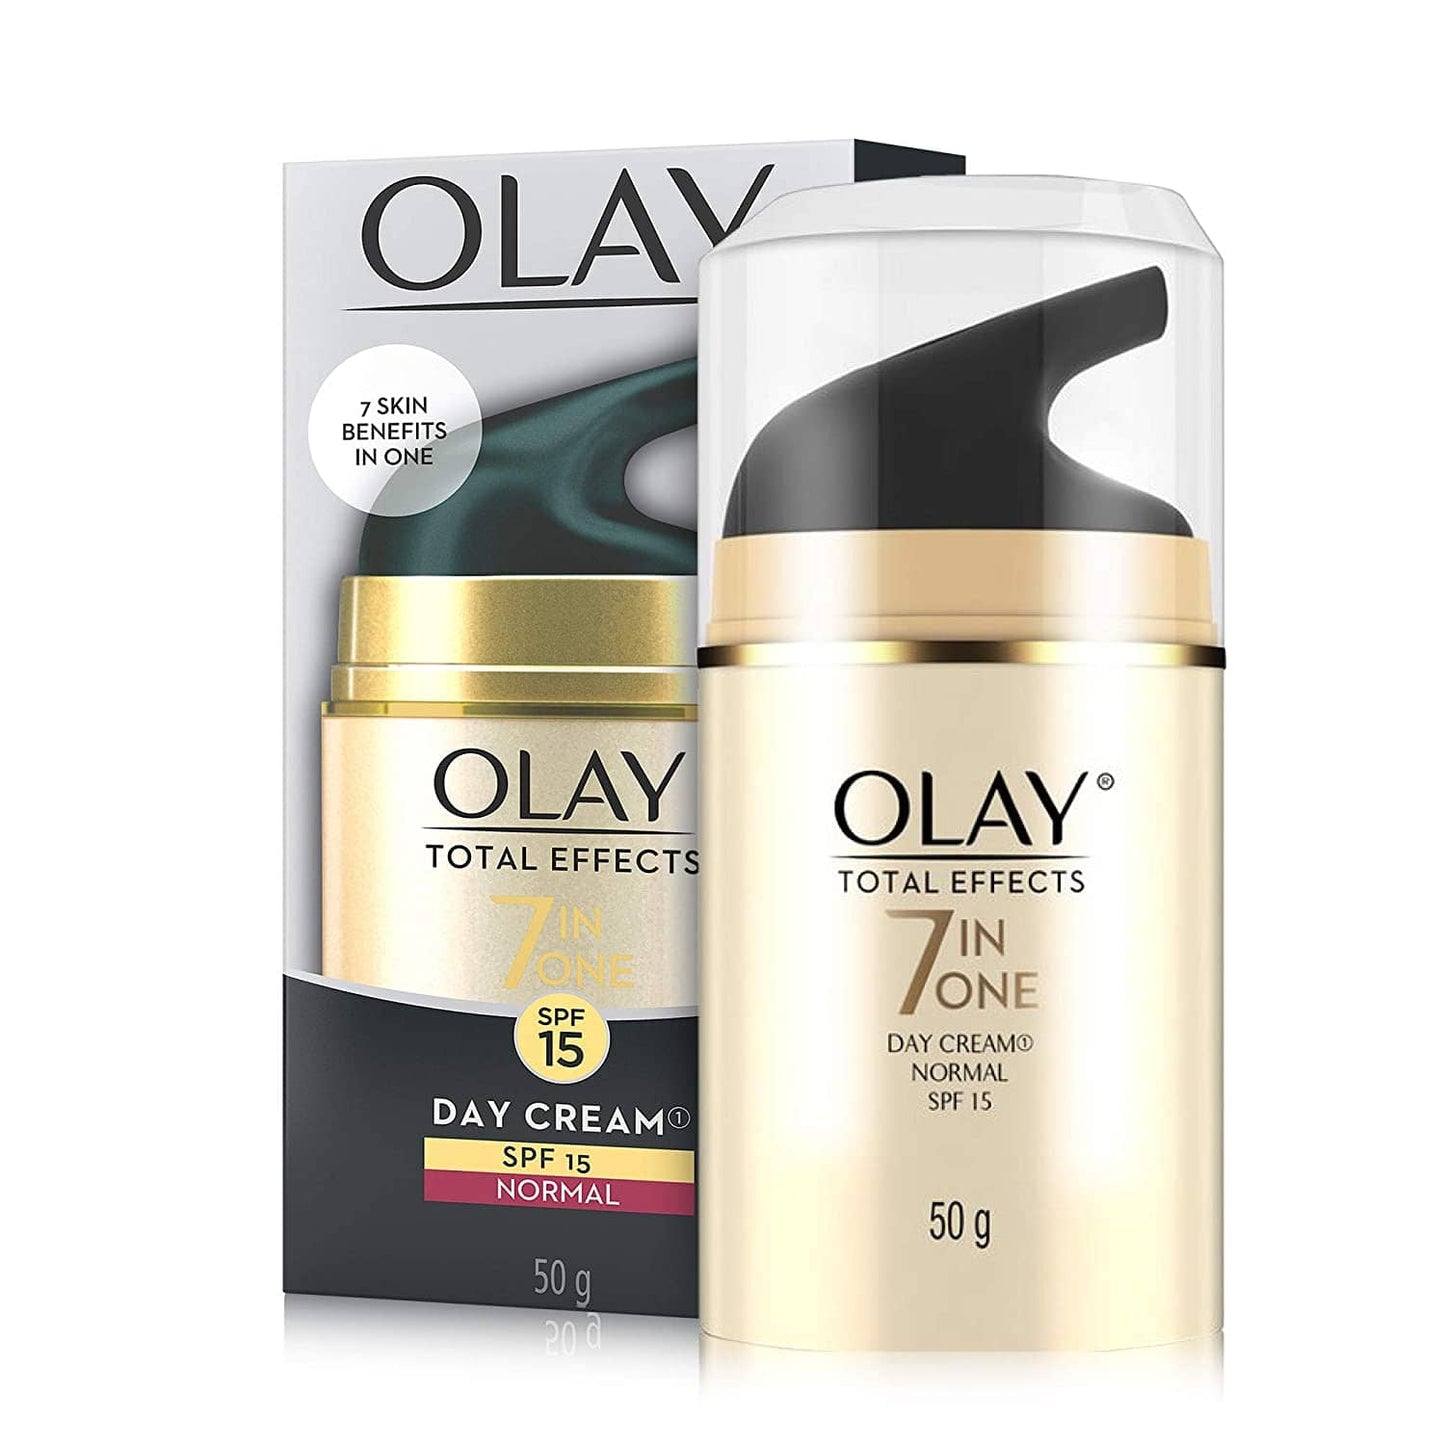 Olay Total Effects 7 In One Day Cream Normal SPF 15 with Vitamin B5